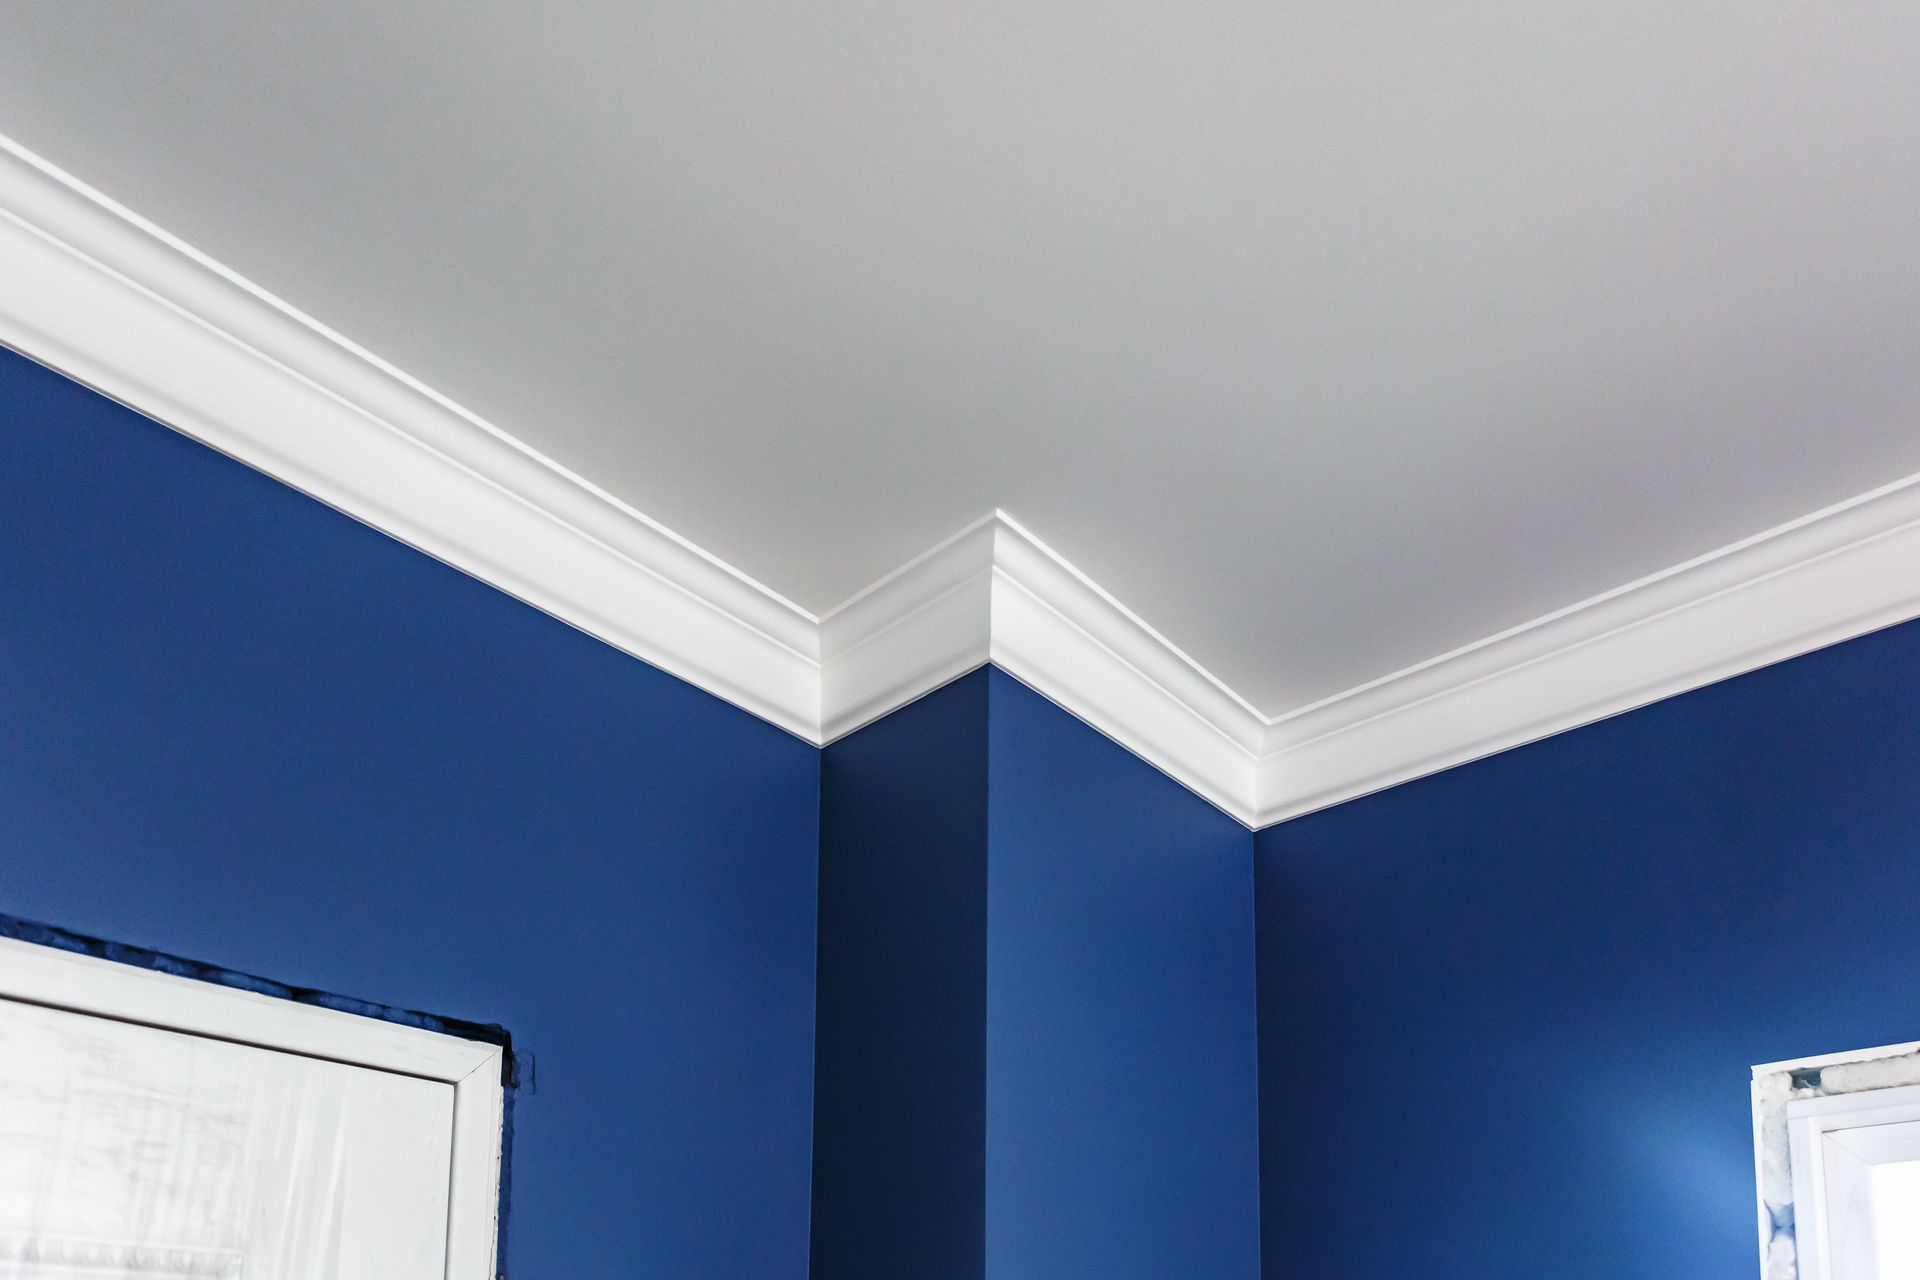 A Corner of A Room with Blue Walls and White Trim